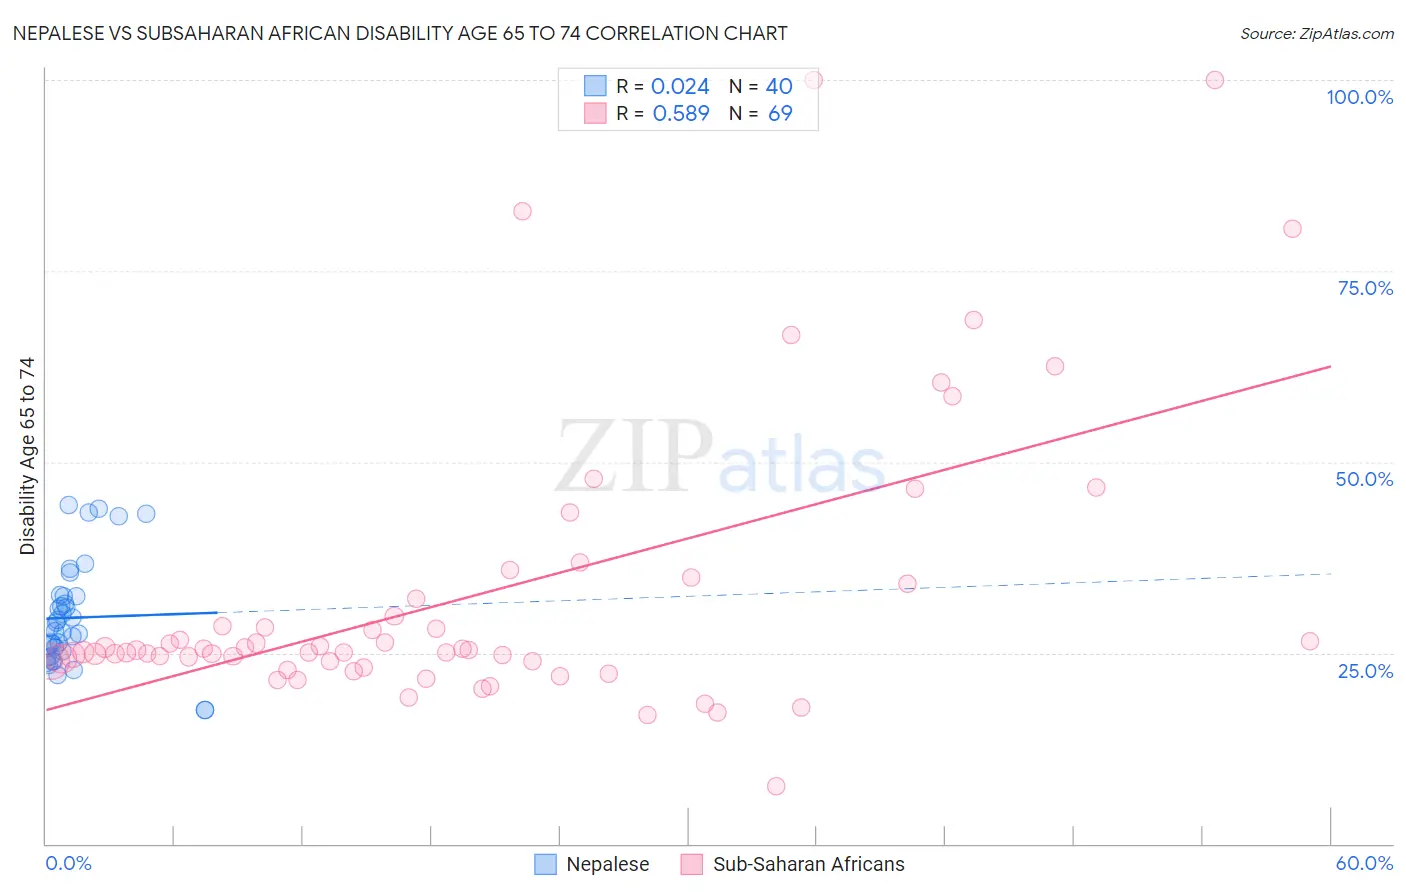 Nepalese vs Subsaharan African Disability Age 65 to 74